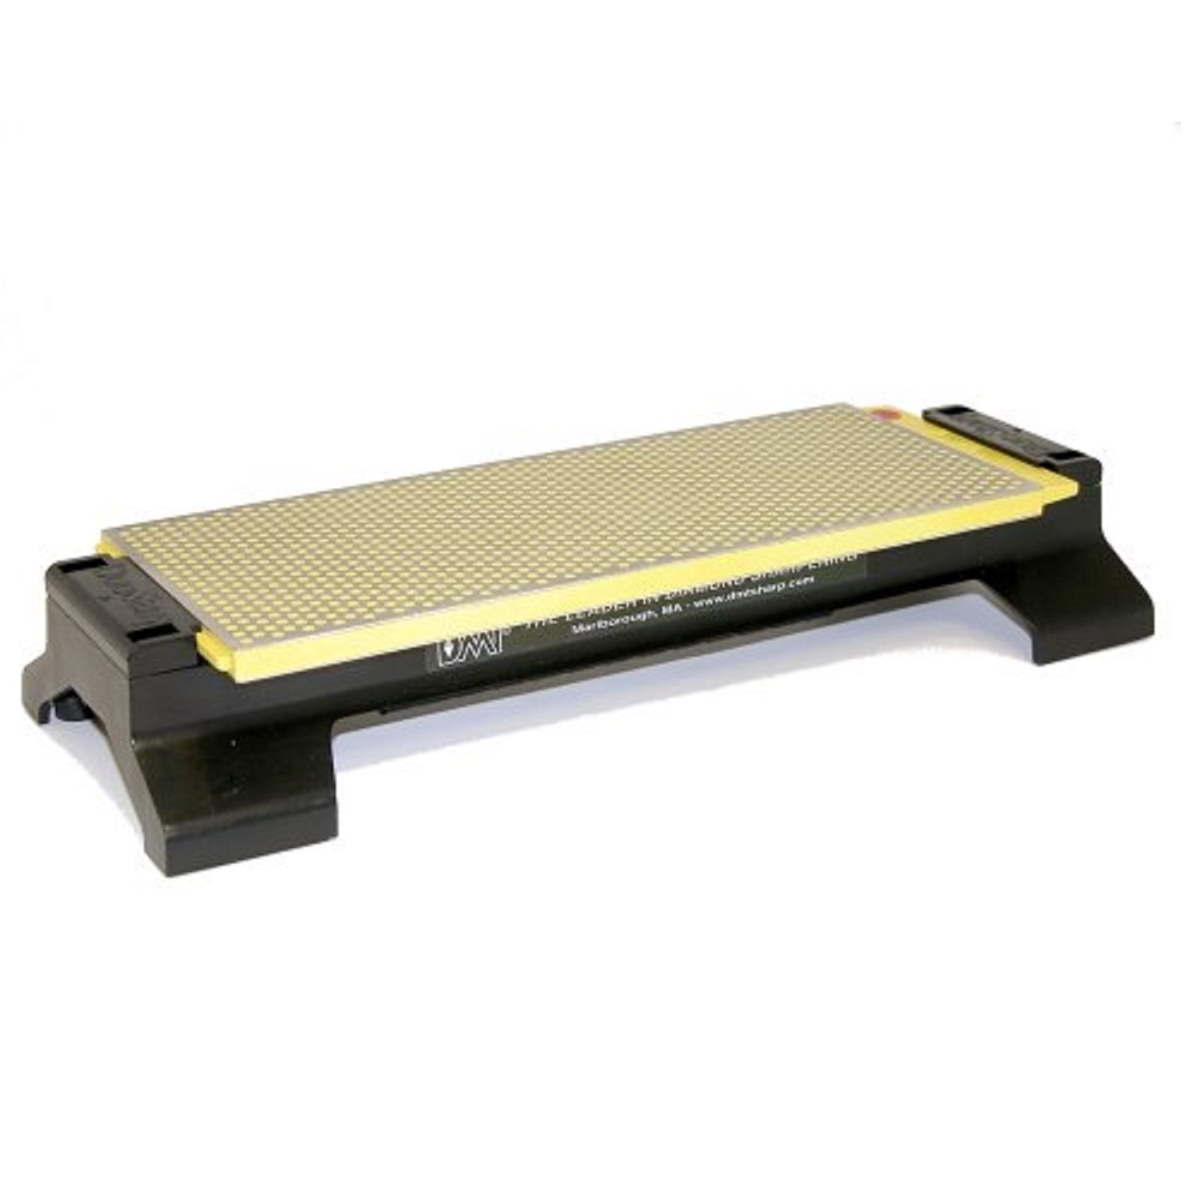 4003515 10 In. Duosharp Bench Stone Extra-fine With Base - Black